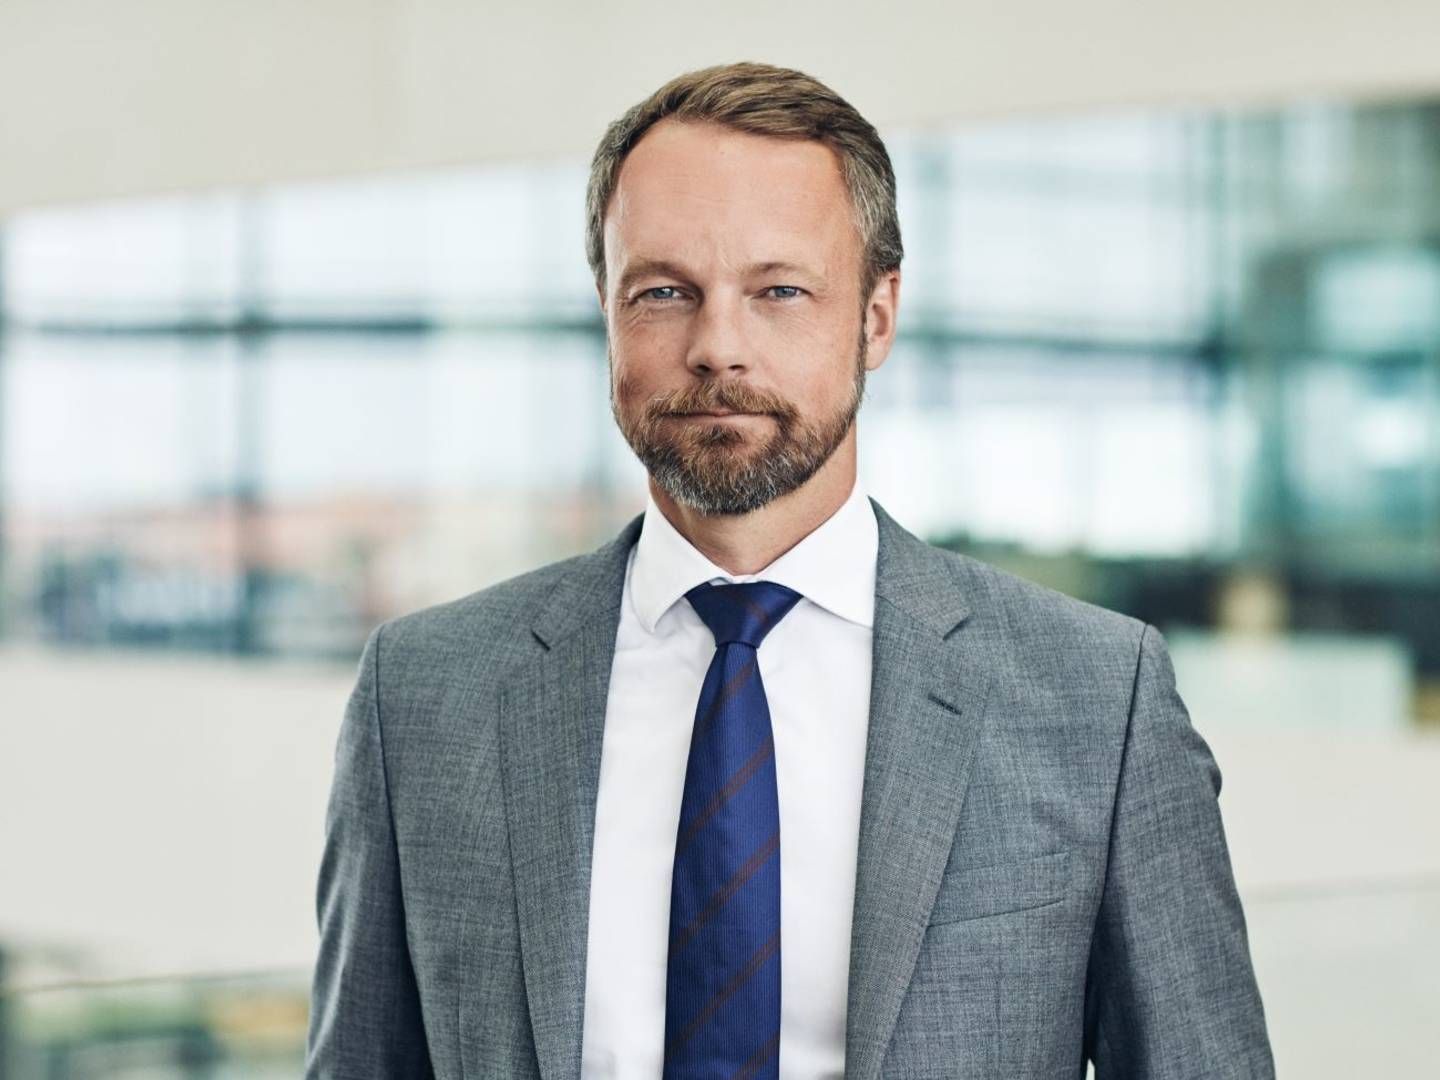 Peter Kjærgaard, the outgoing chair of the Danish Investment Association and Head of Nykredit Wealth Management | Photo: PR/Nykredit